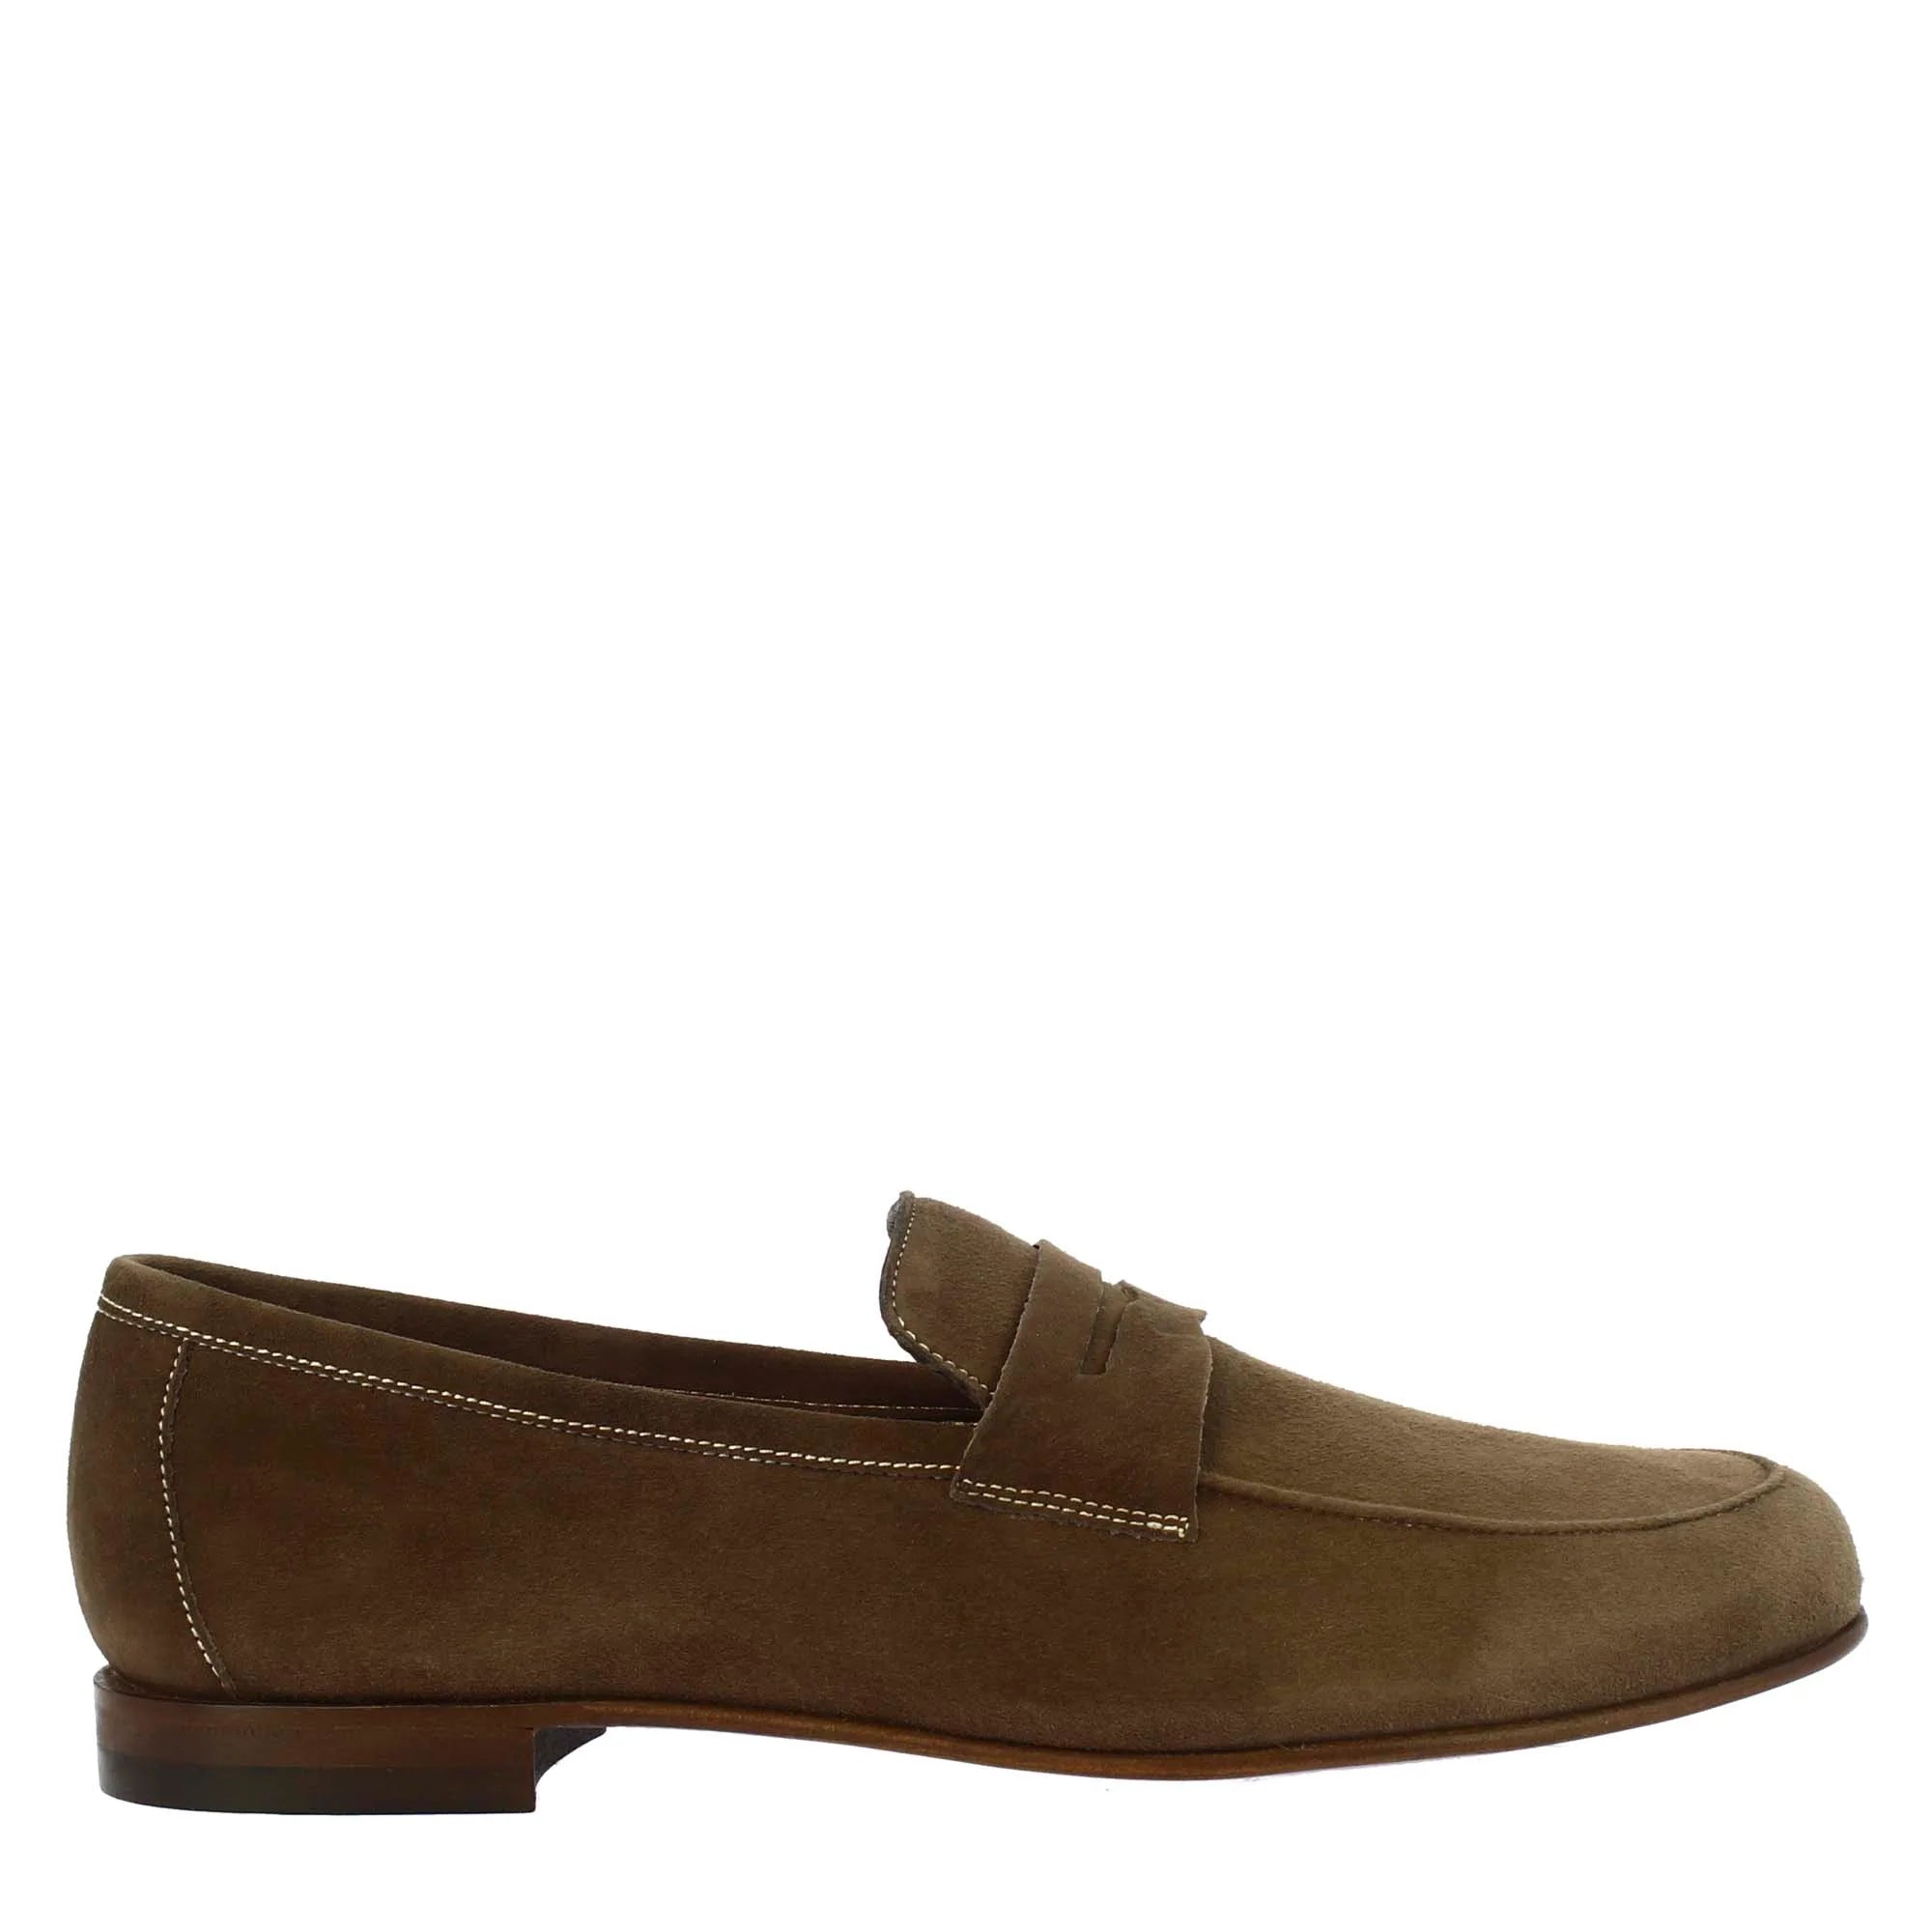 Men's slip-on loafers in taupe suede leather